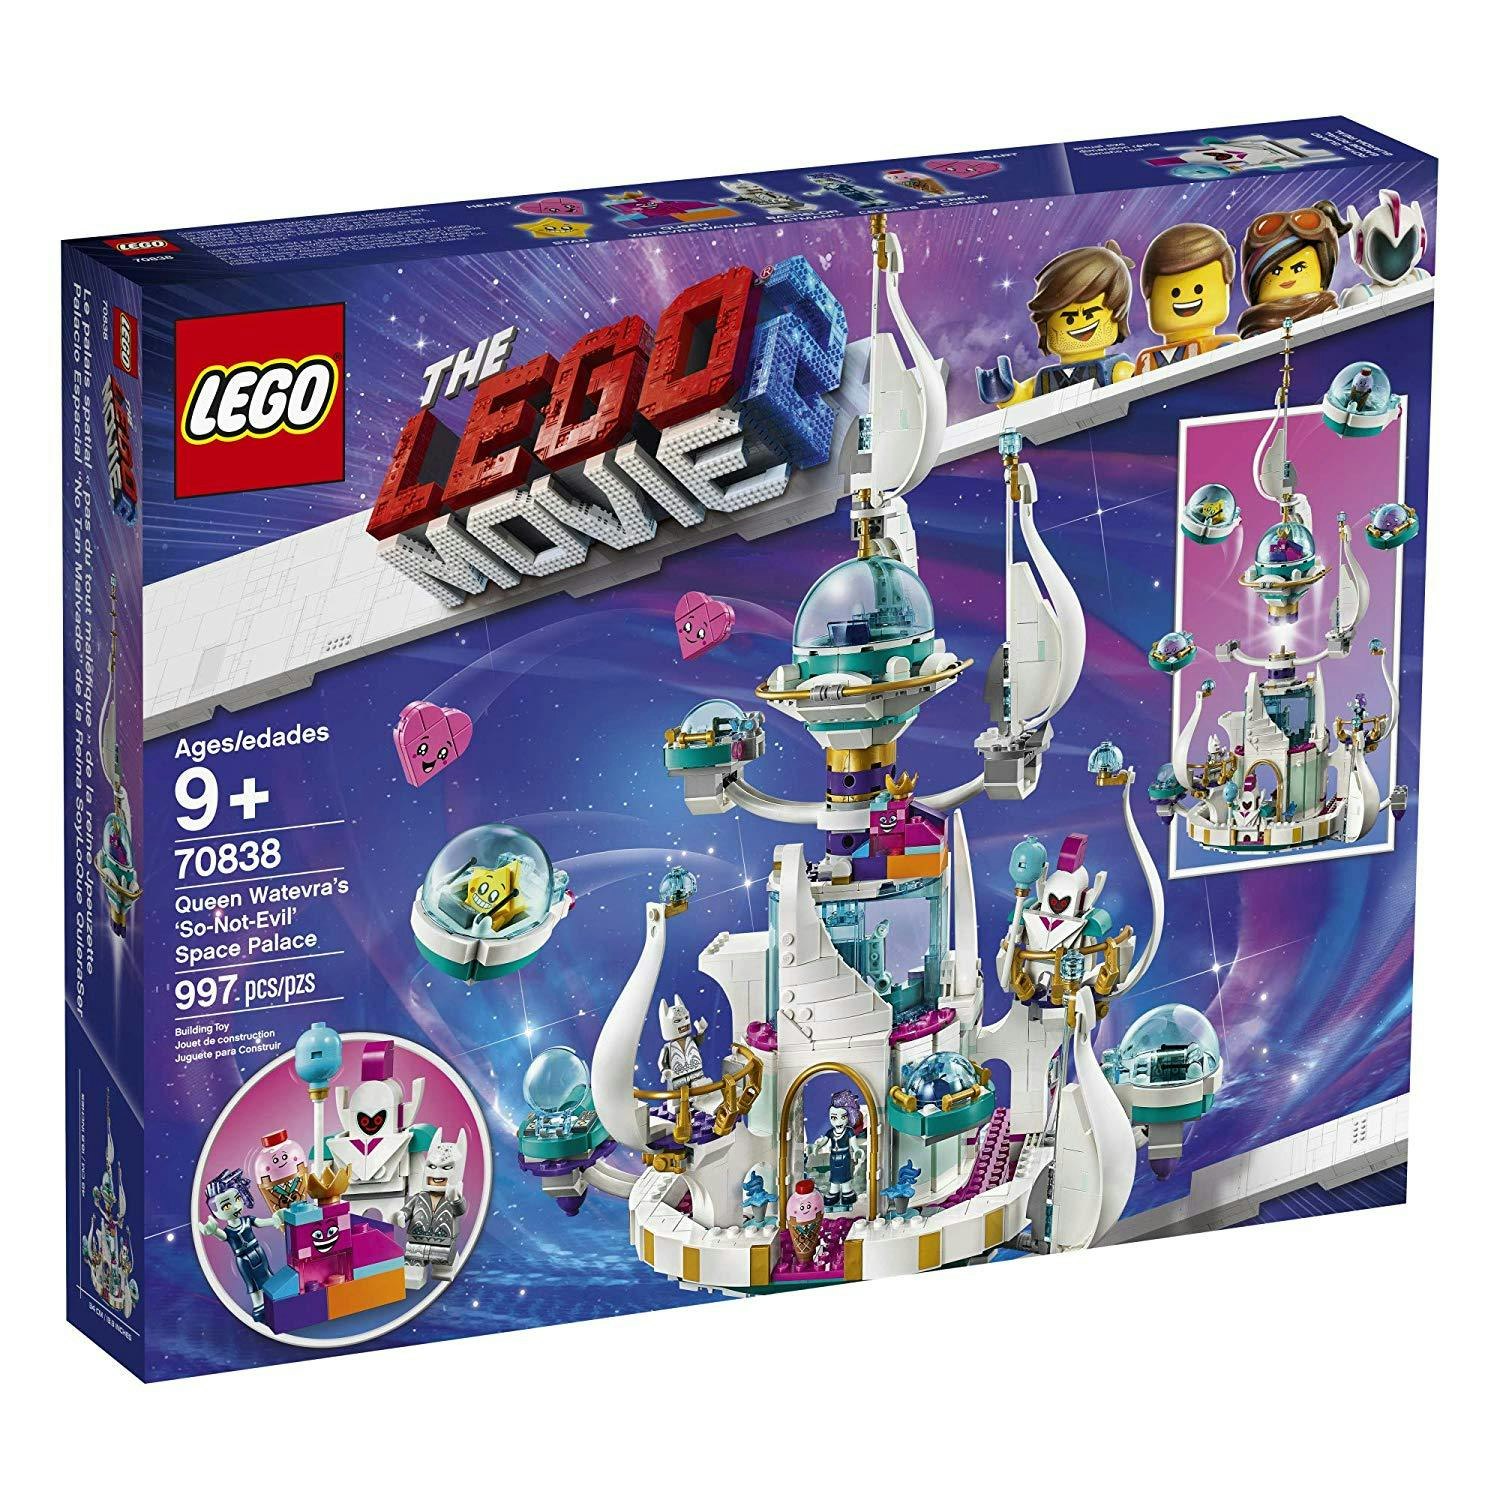 NEW LEGO THE LEGO MOVIE 2 70838 QUEEN WHATEVRA'S 'SO-NOT-EVIL' SPACE PALACE